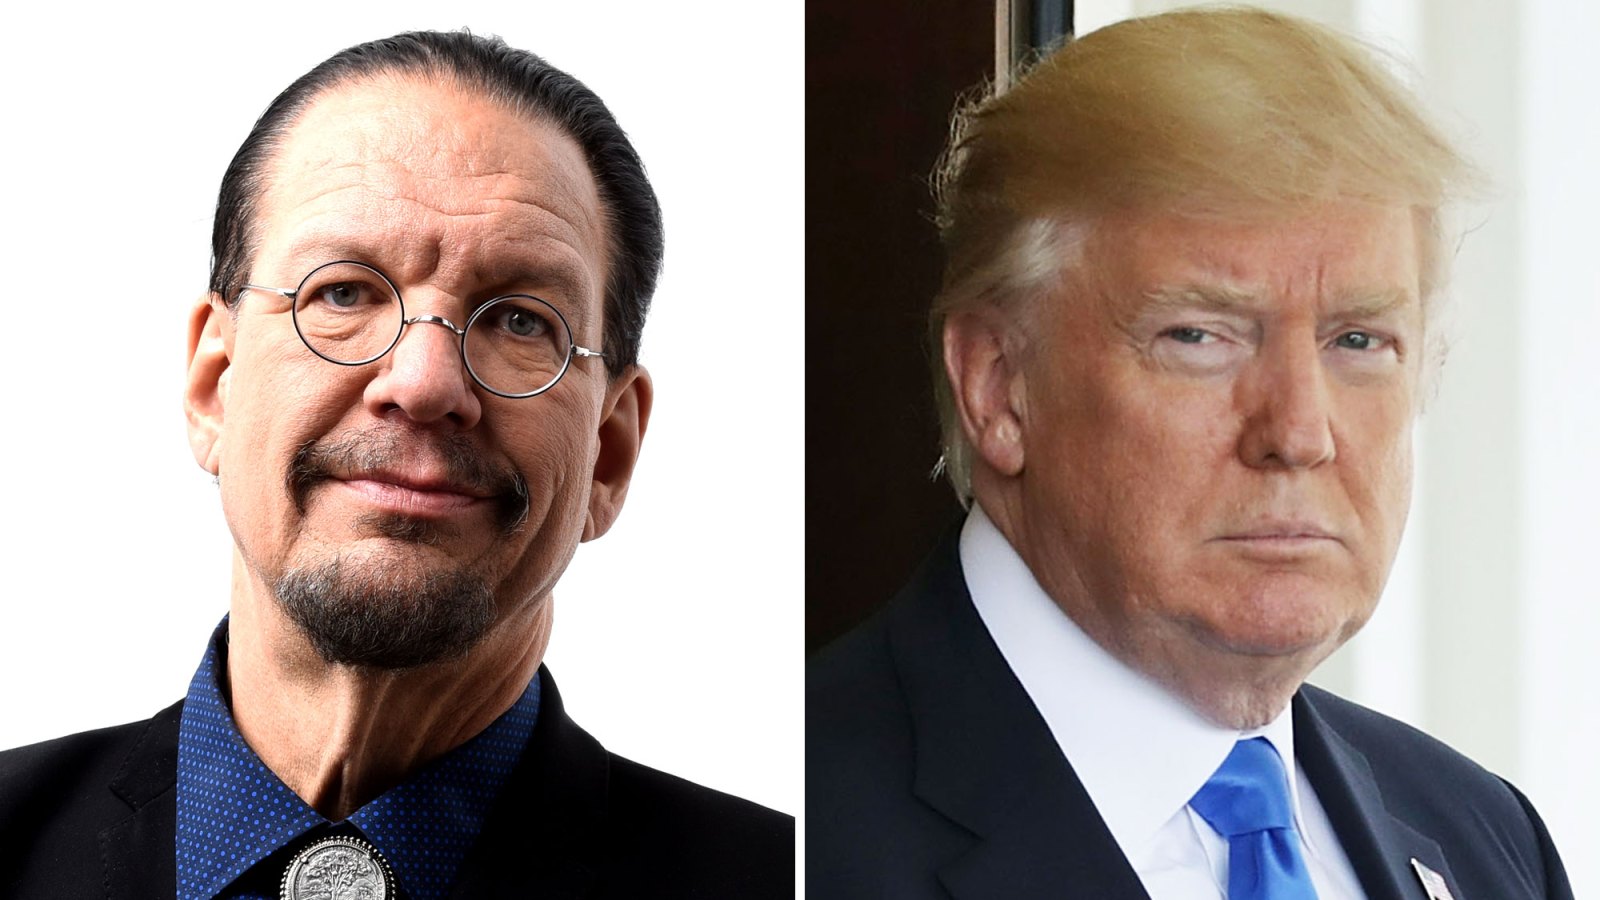 Penn Jillette and Donald Trump racially insensitive things the apprentice